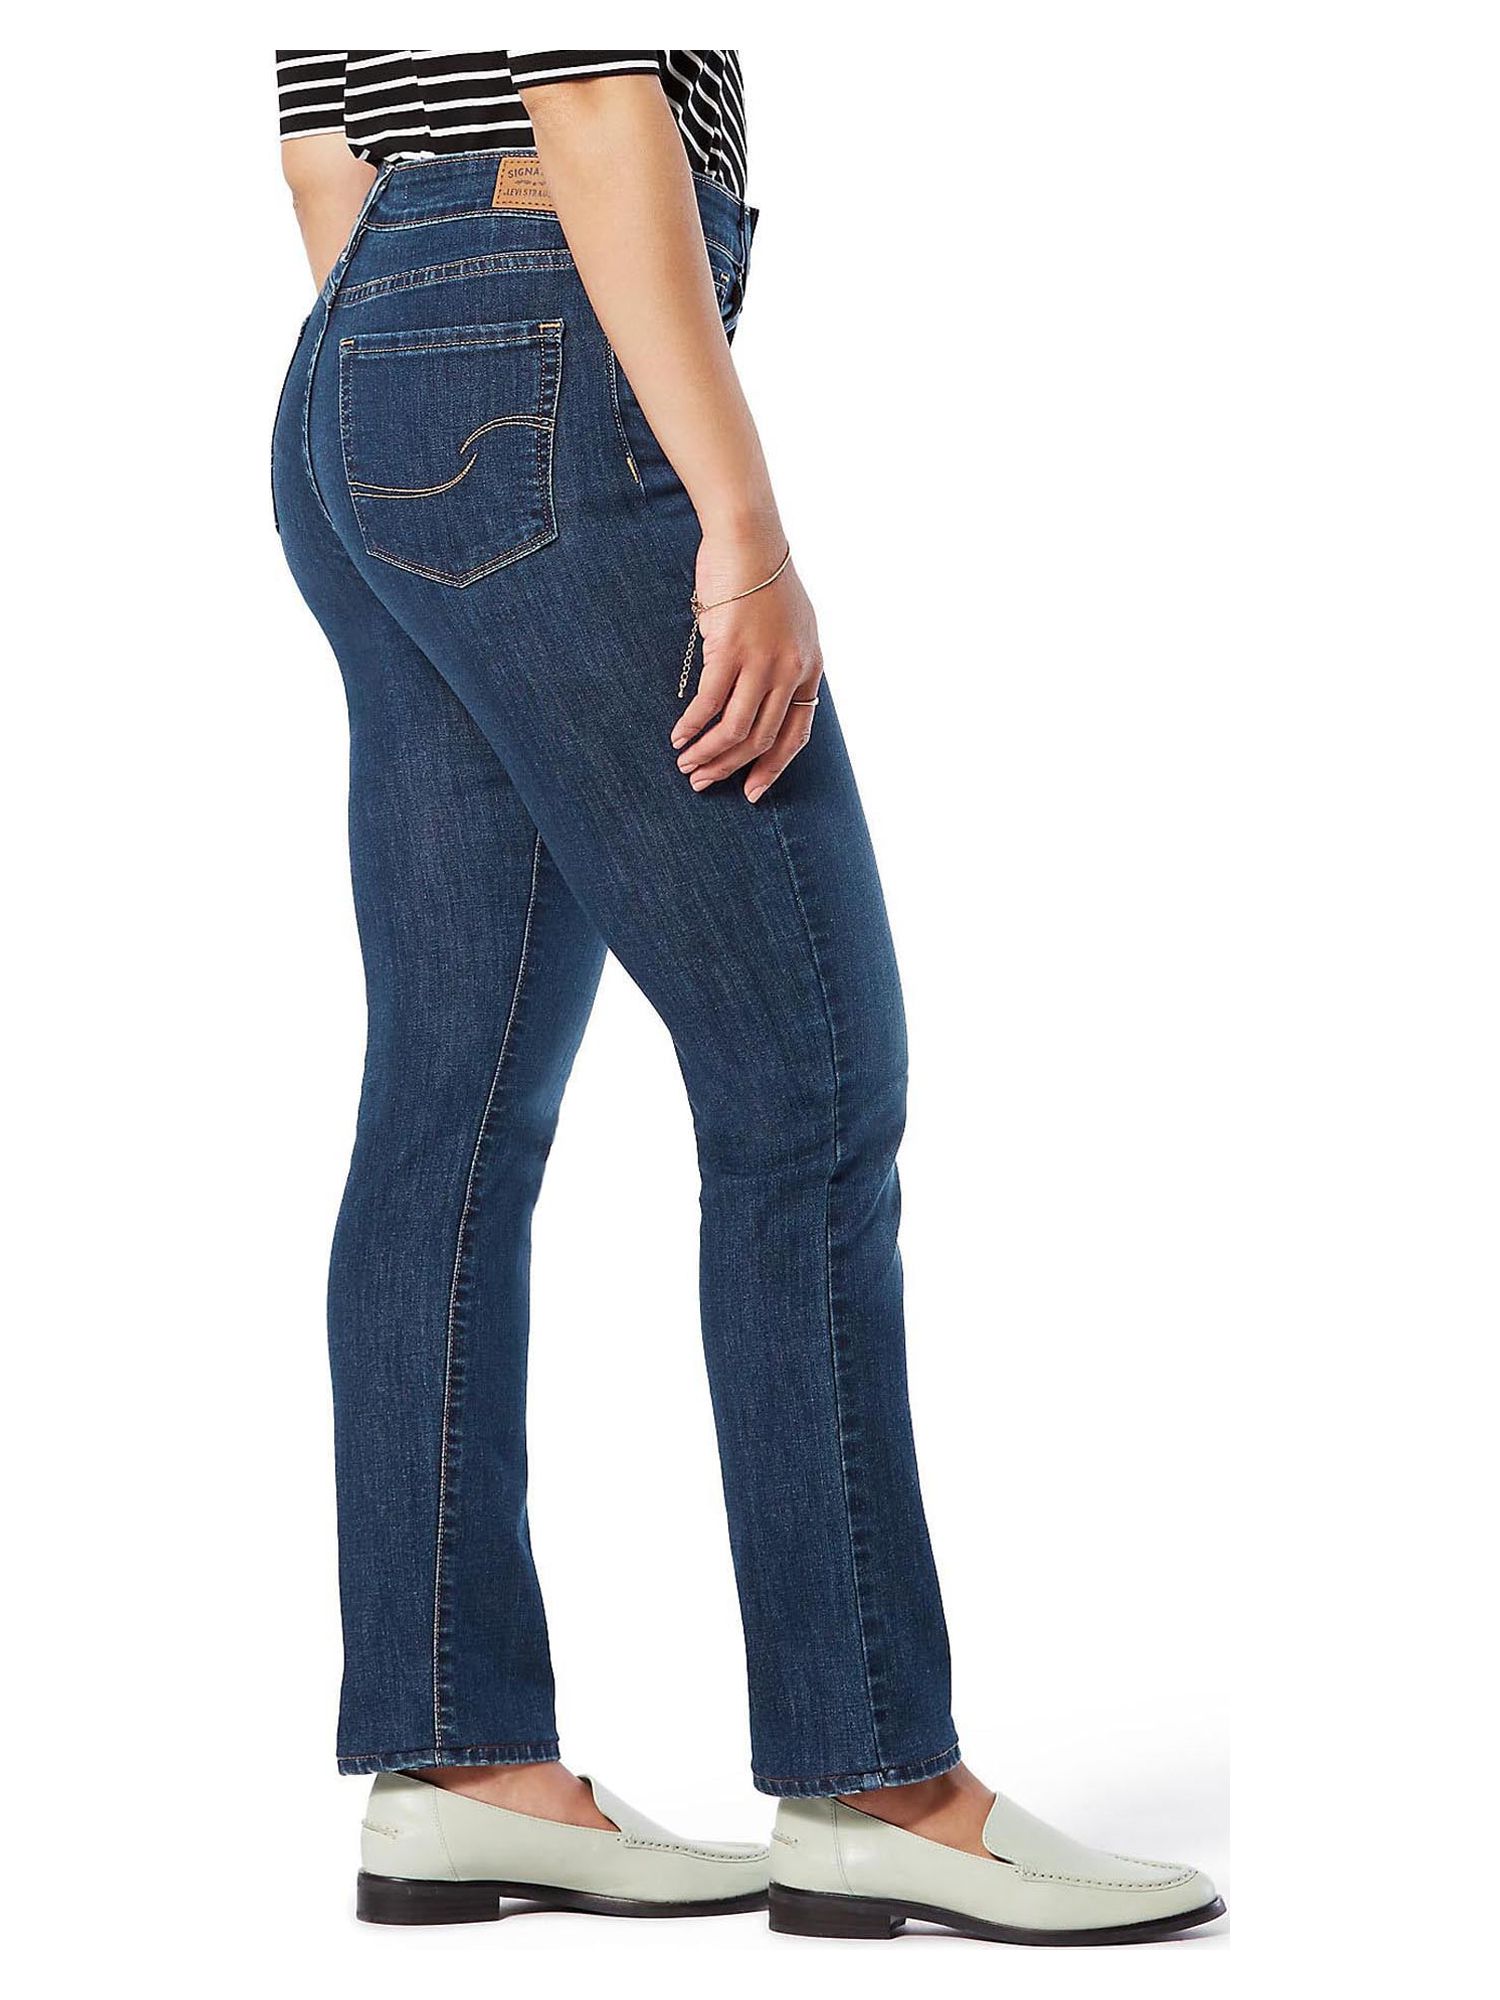 Signature by Levi Strauss & Co. Women's and Women's Plus Size Mid Rise Modern Straight Jeans, Sizes 2-28 - image 3 of 8